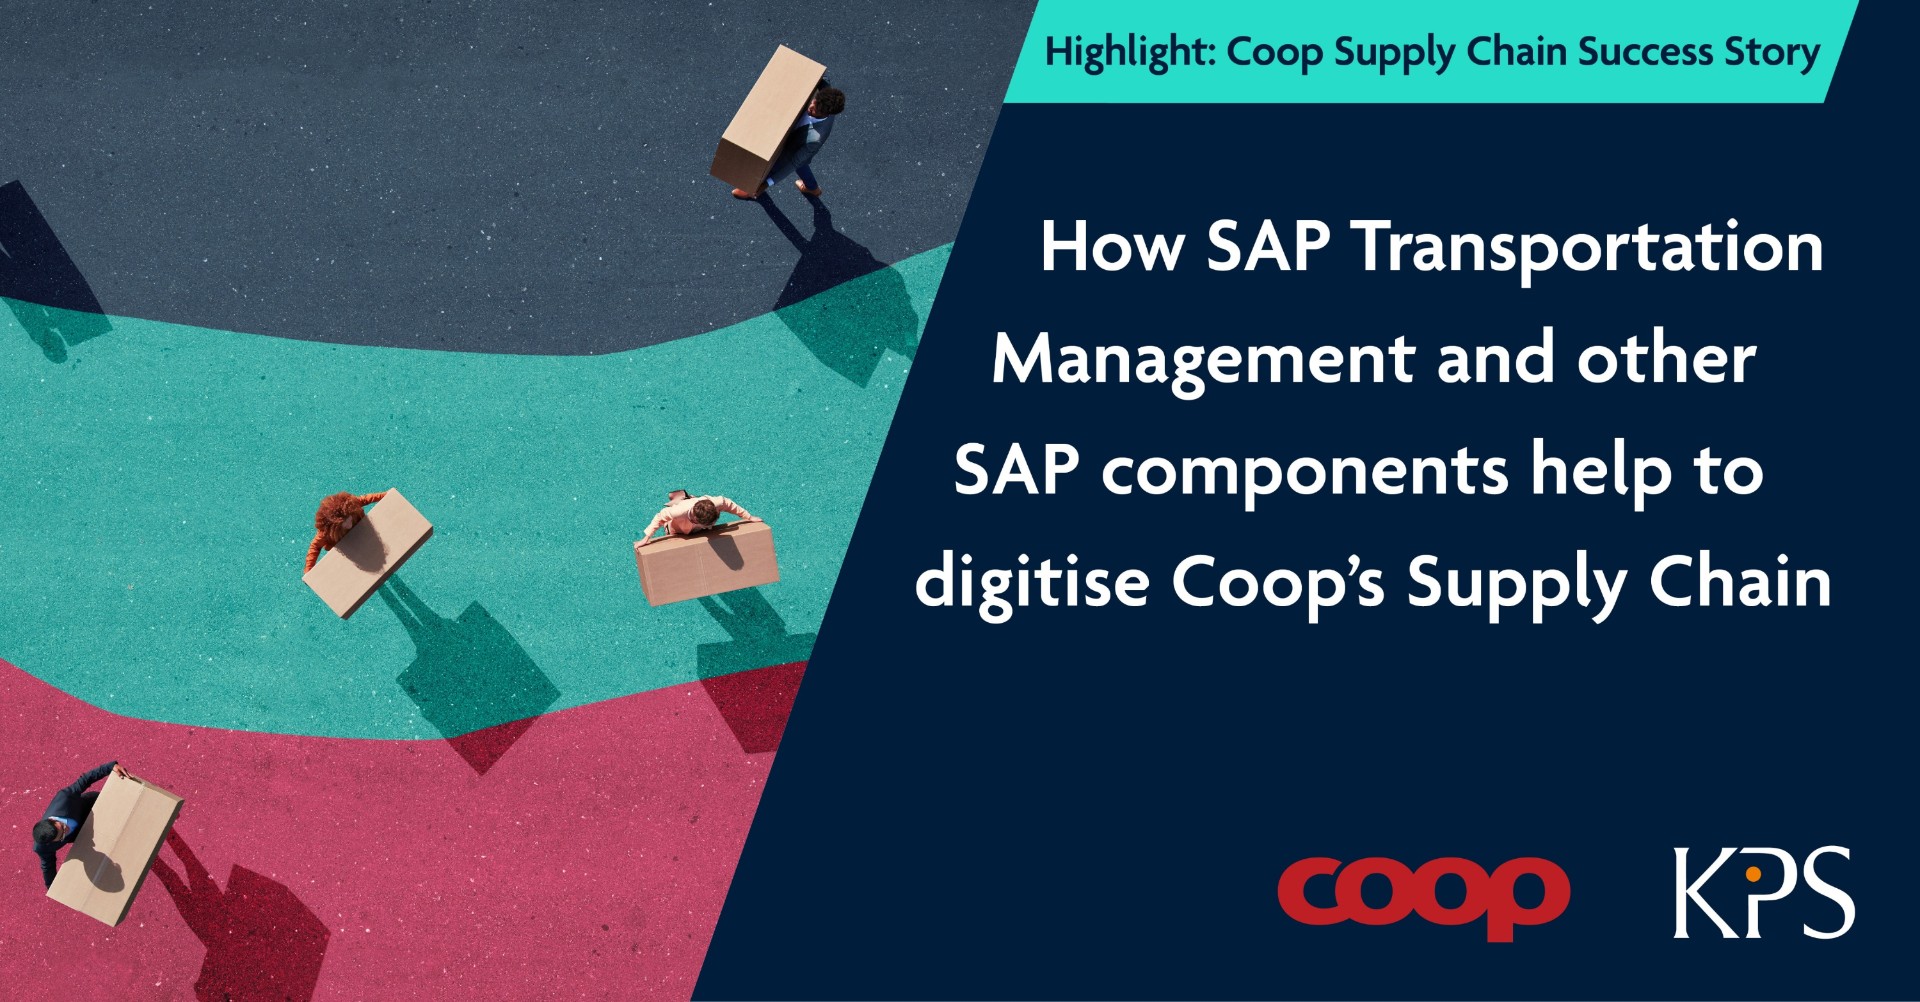 The digitalisation of the Supply Chain at Coop Danmark with SAP TM & KPS